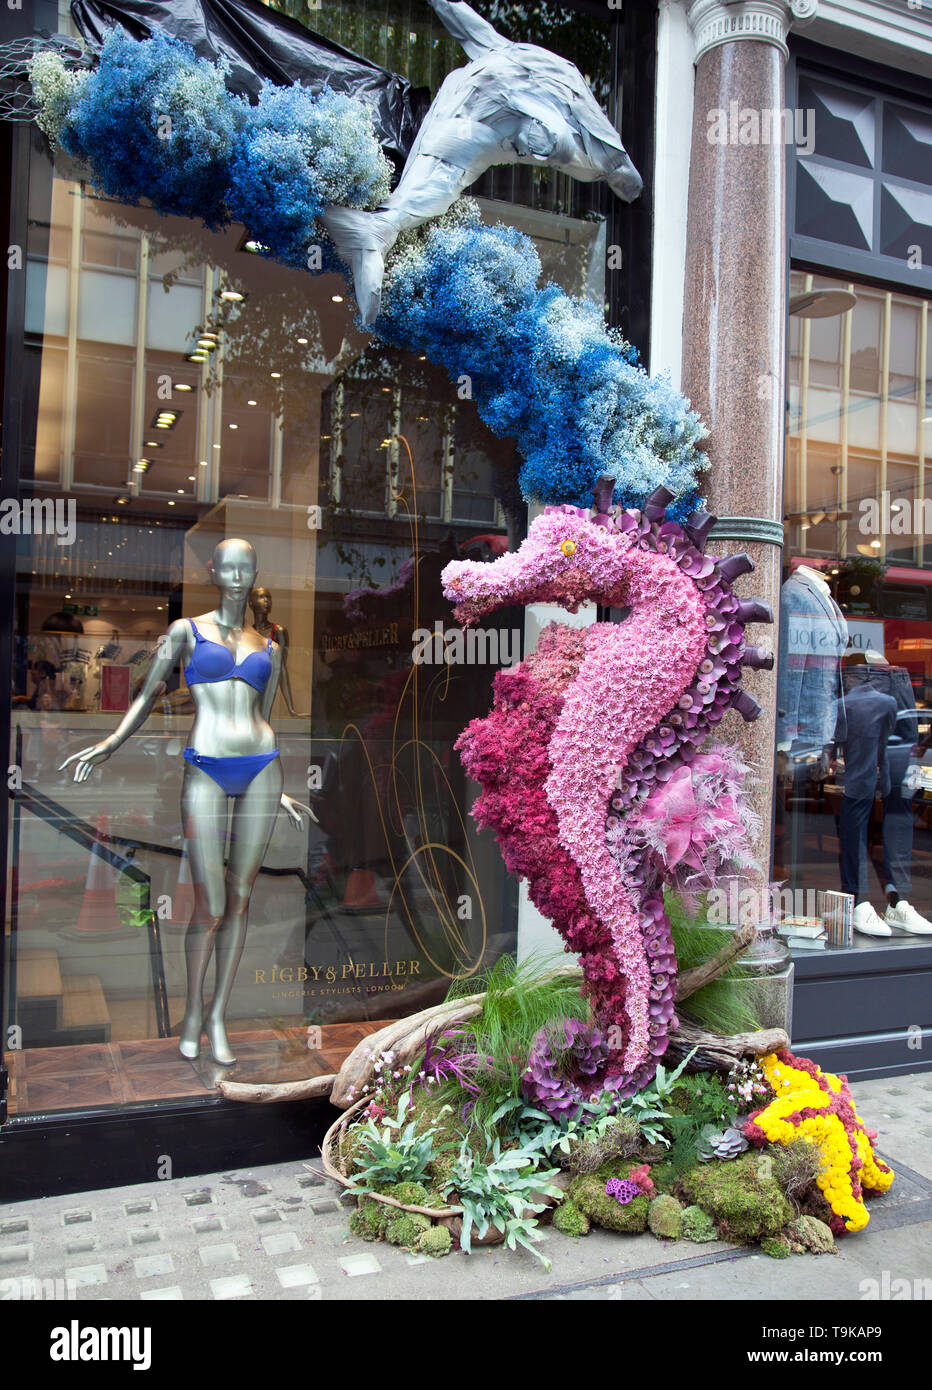 Chelsea’s other flower show - Rigby & Peller’s floral display in Kings Road, Chelsea Stock Photo